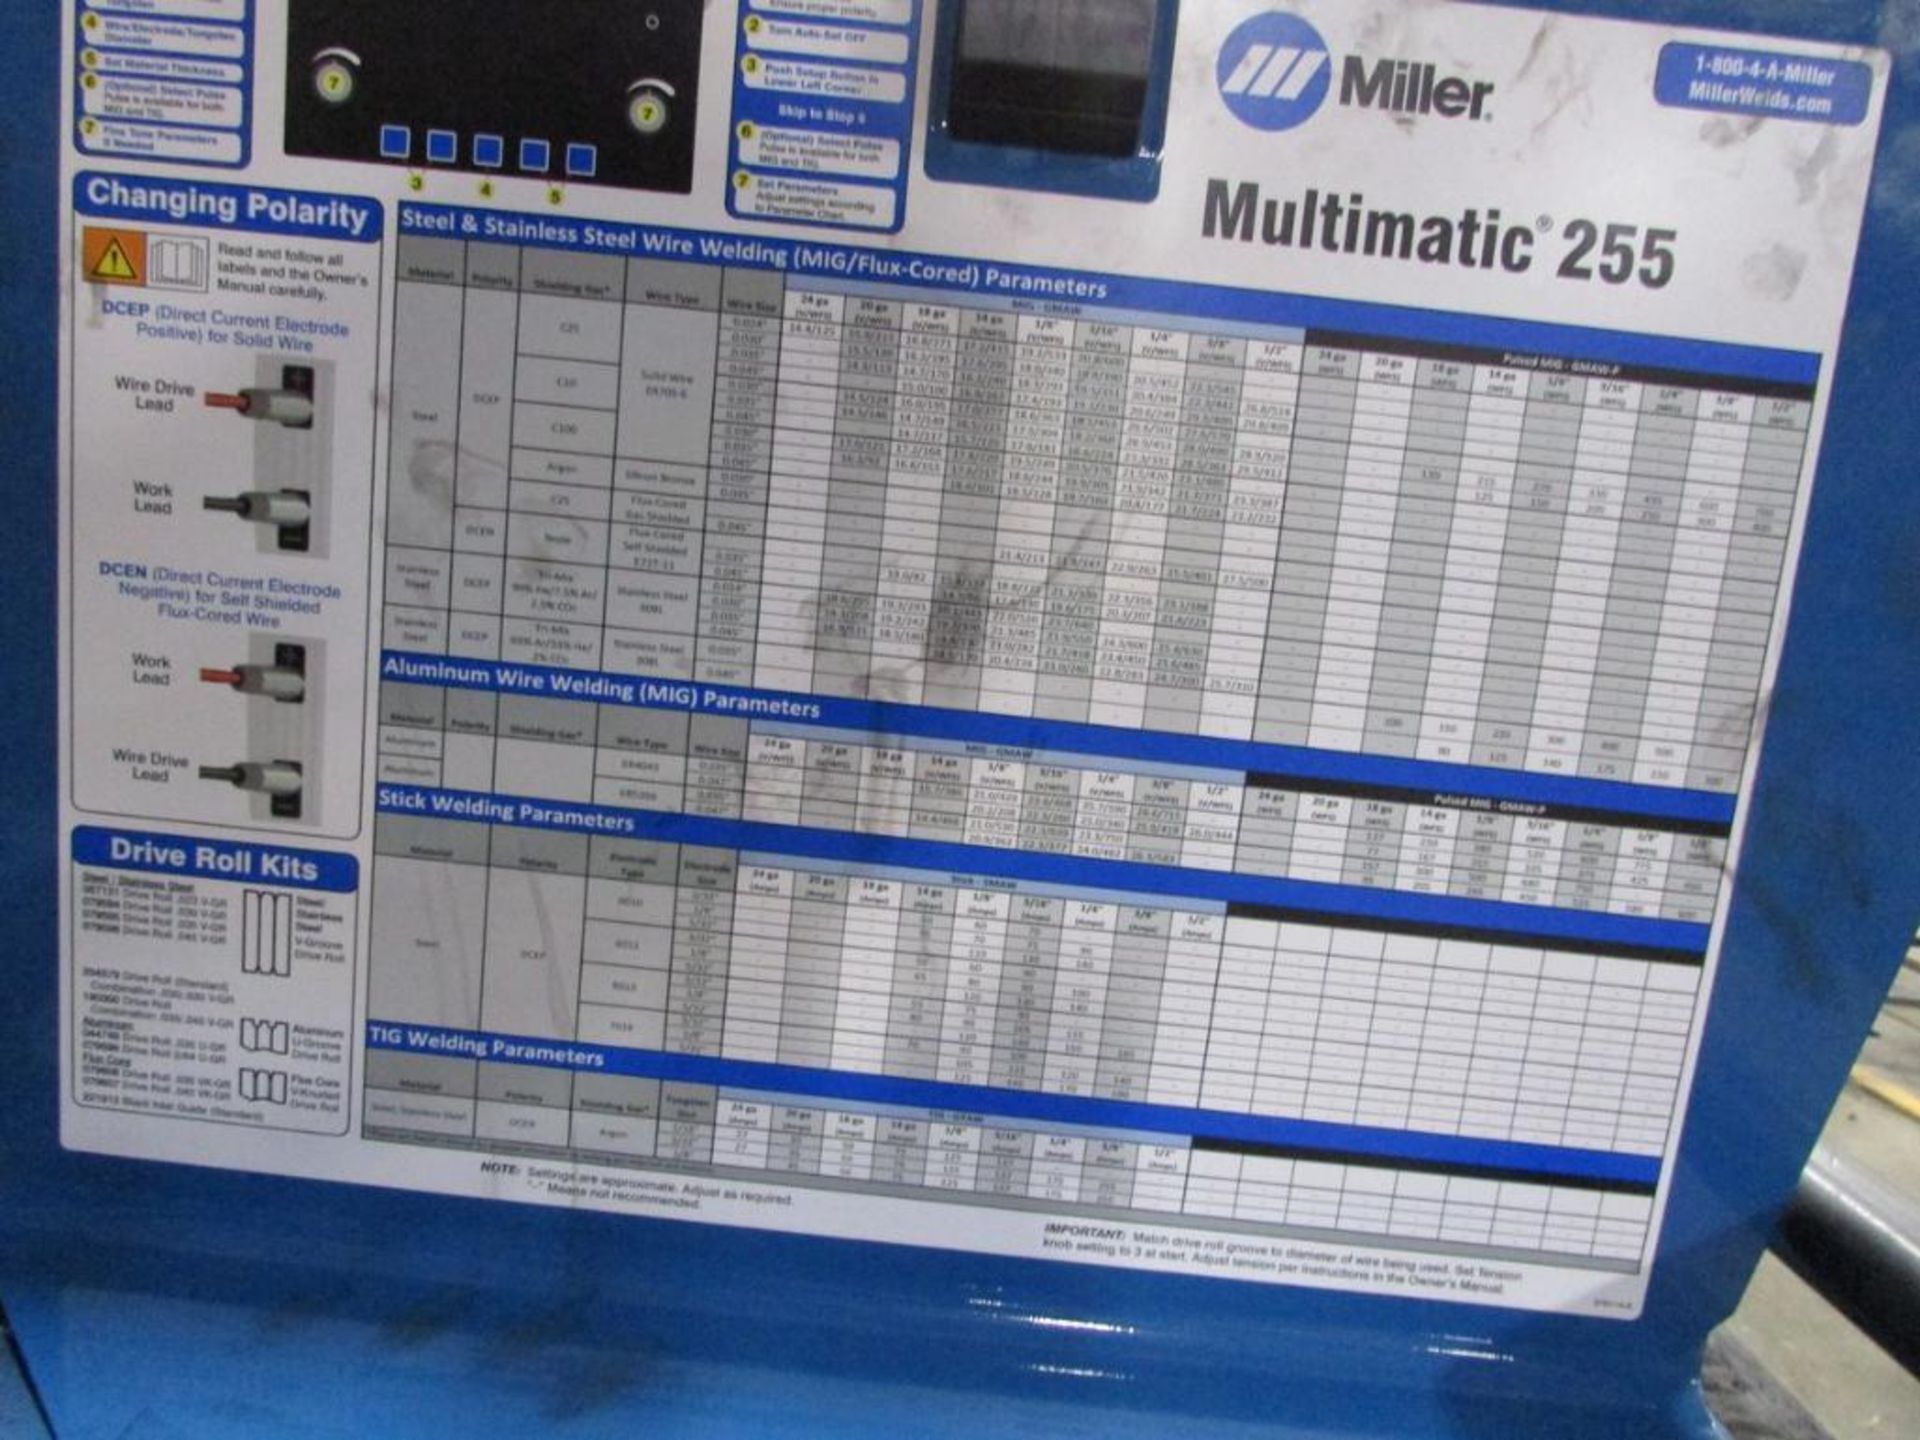 Miller Multimatic 255, Multi Process Welding Power Source, with Internal Wire Feeder, Welding Clamp, - Image 10 of 10